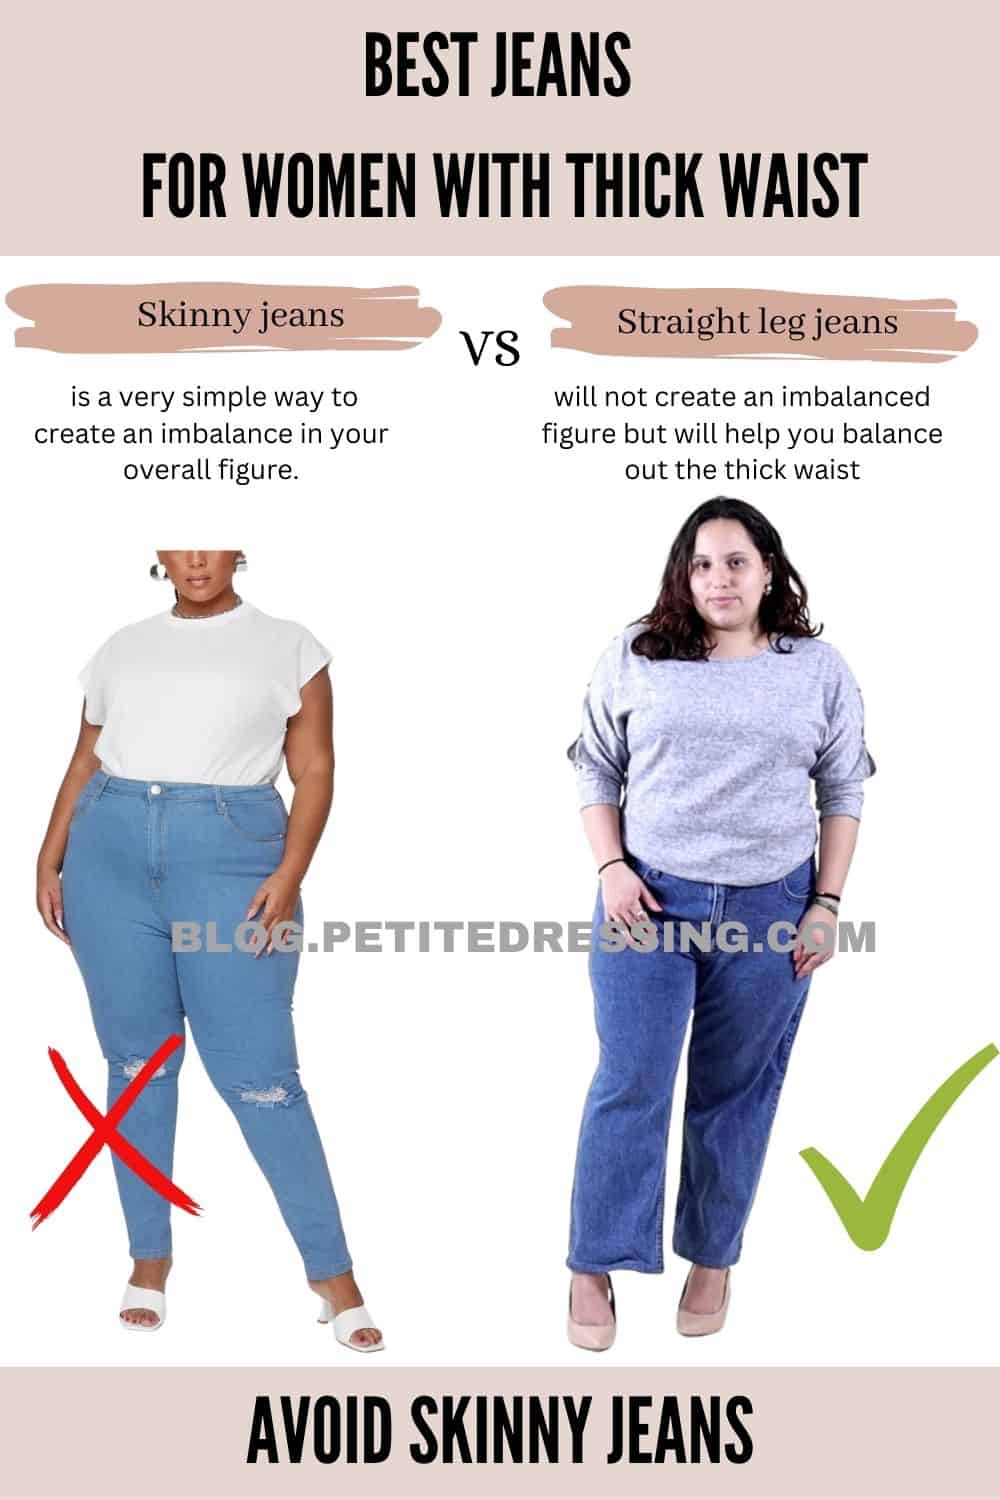 Comprehensive Jeans Guide for Women with a Thick Waist